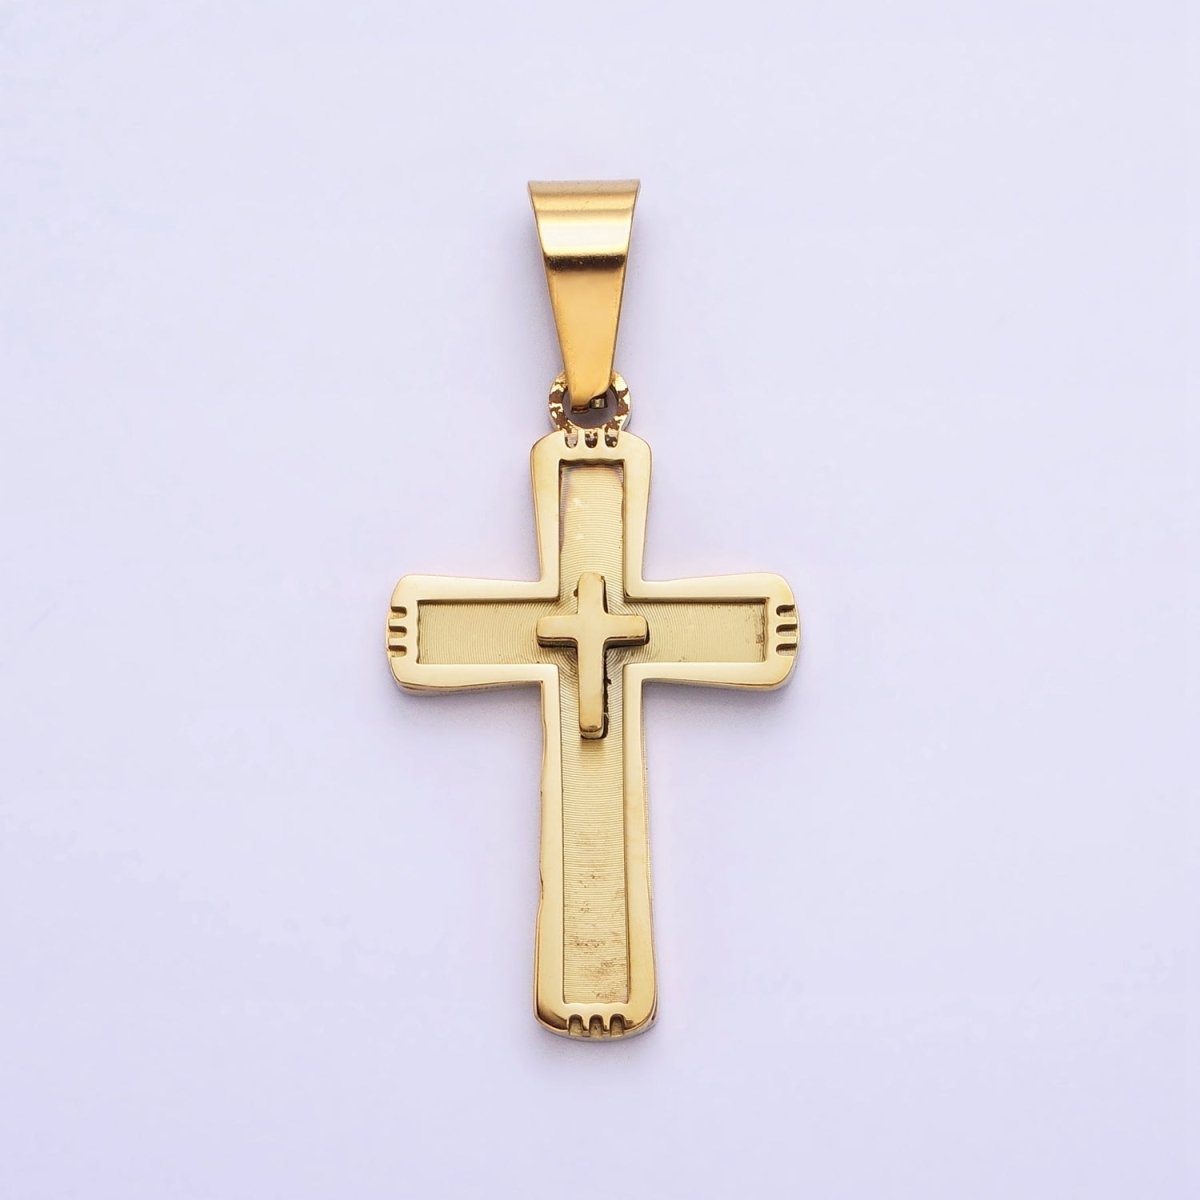 Stainless Steel Cross Pendant in Gold Silver for Unisex Statement Religious Jewelry Making | P-1118 - DLUXCA